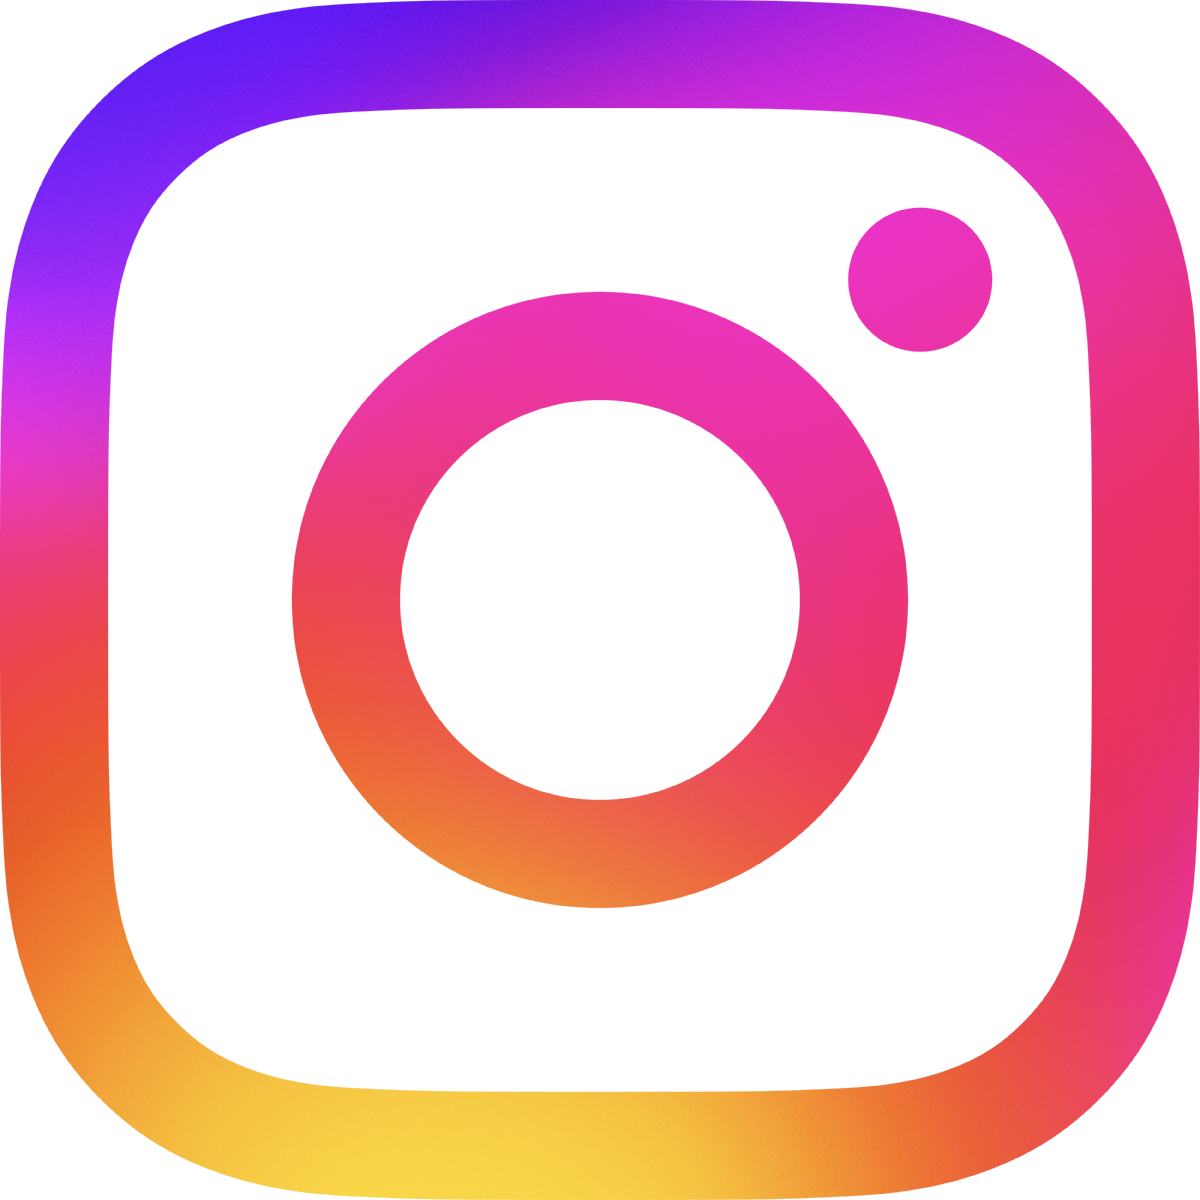 Click here to visit the club instagram page